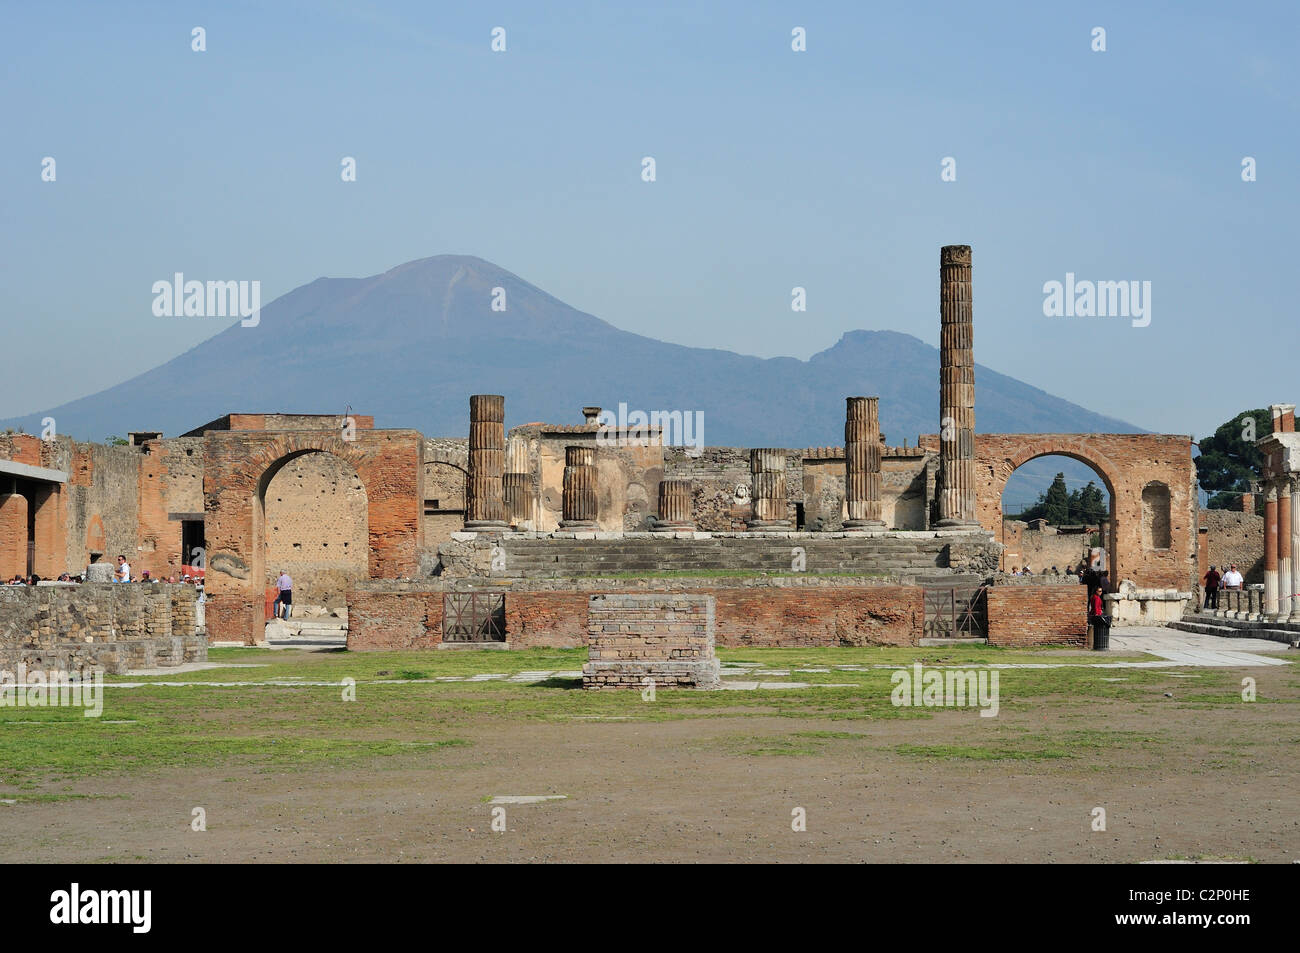 Pompei. Italy. Ancient ruins of the Forum of Pompeii with Mount Vesuvius in the background, Pompeii archaeological site. Stock Photo